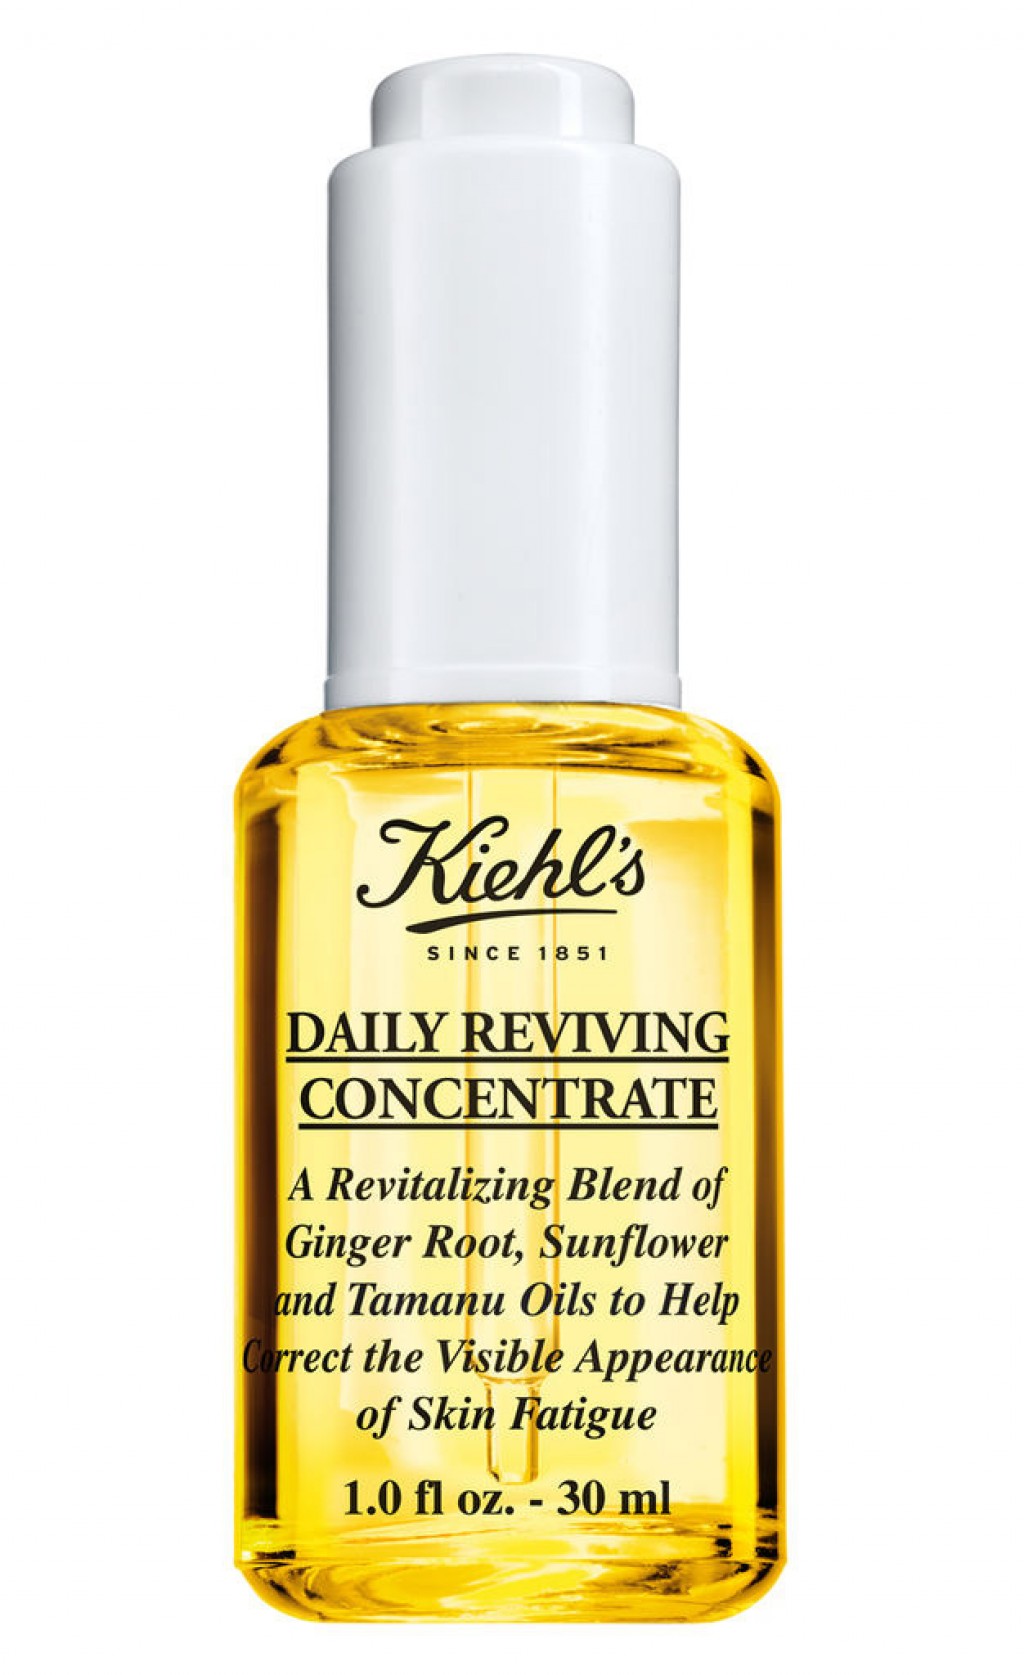 Kiehl's Since 1851 Daily Reviving Concentrate | Skin Care | BeautyAlmanac